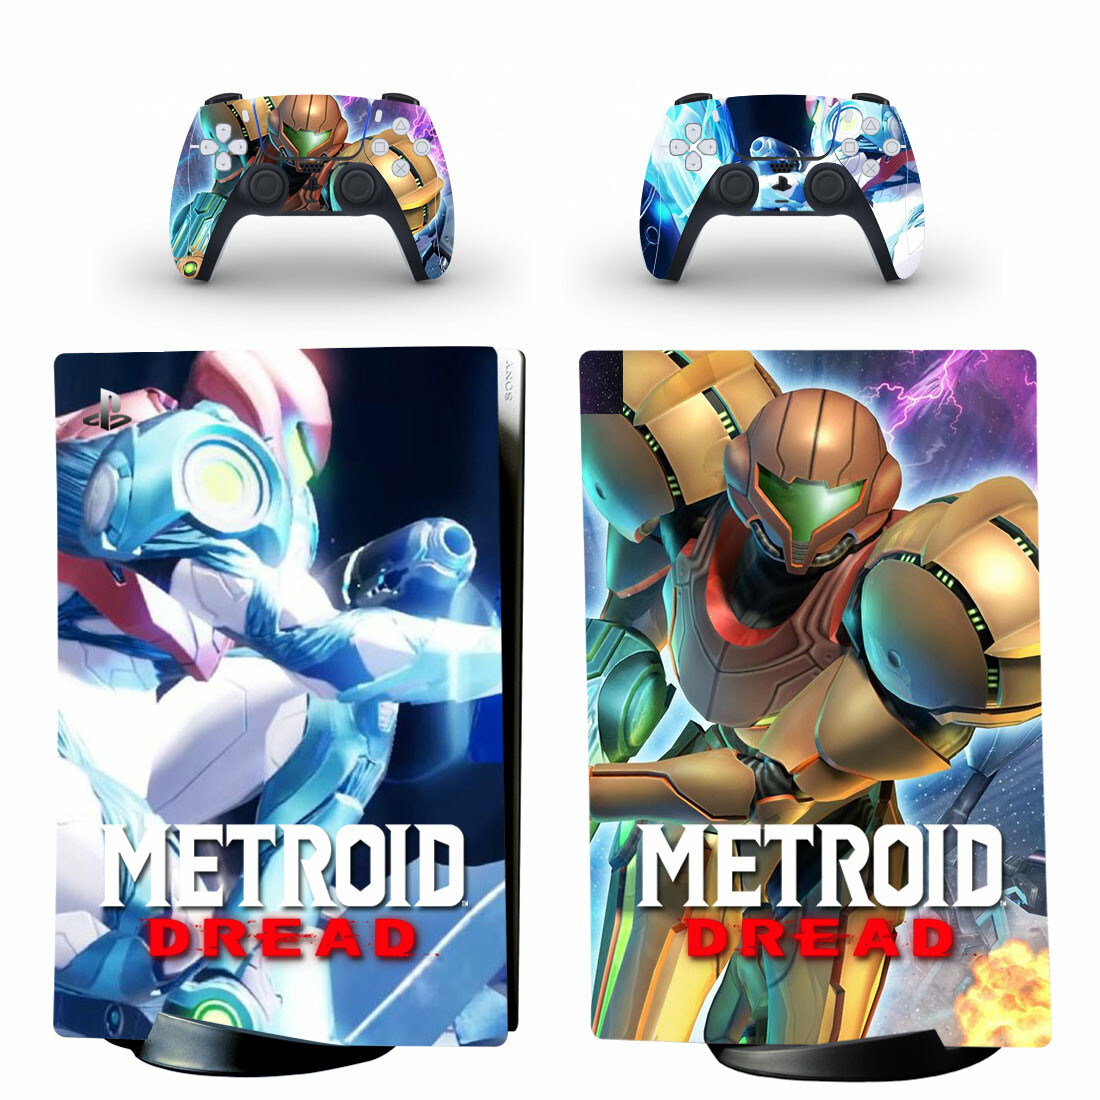 Metroid Dread Skin Sticker Decal For PS5 Digital Edition And Controllers